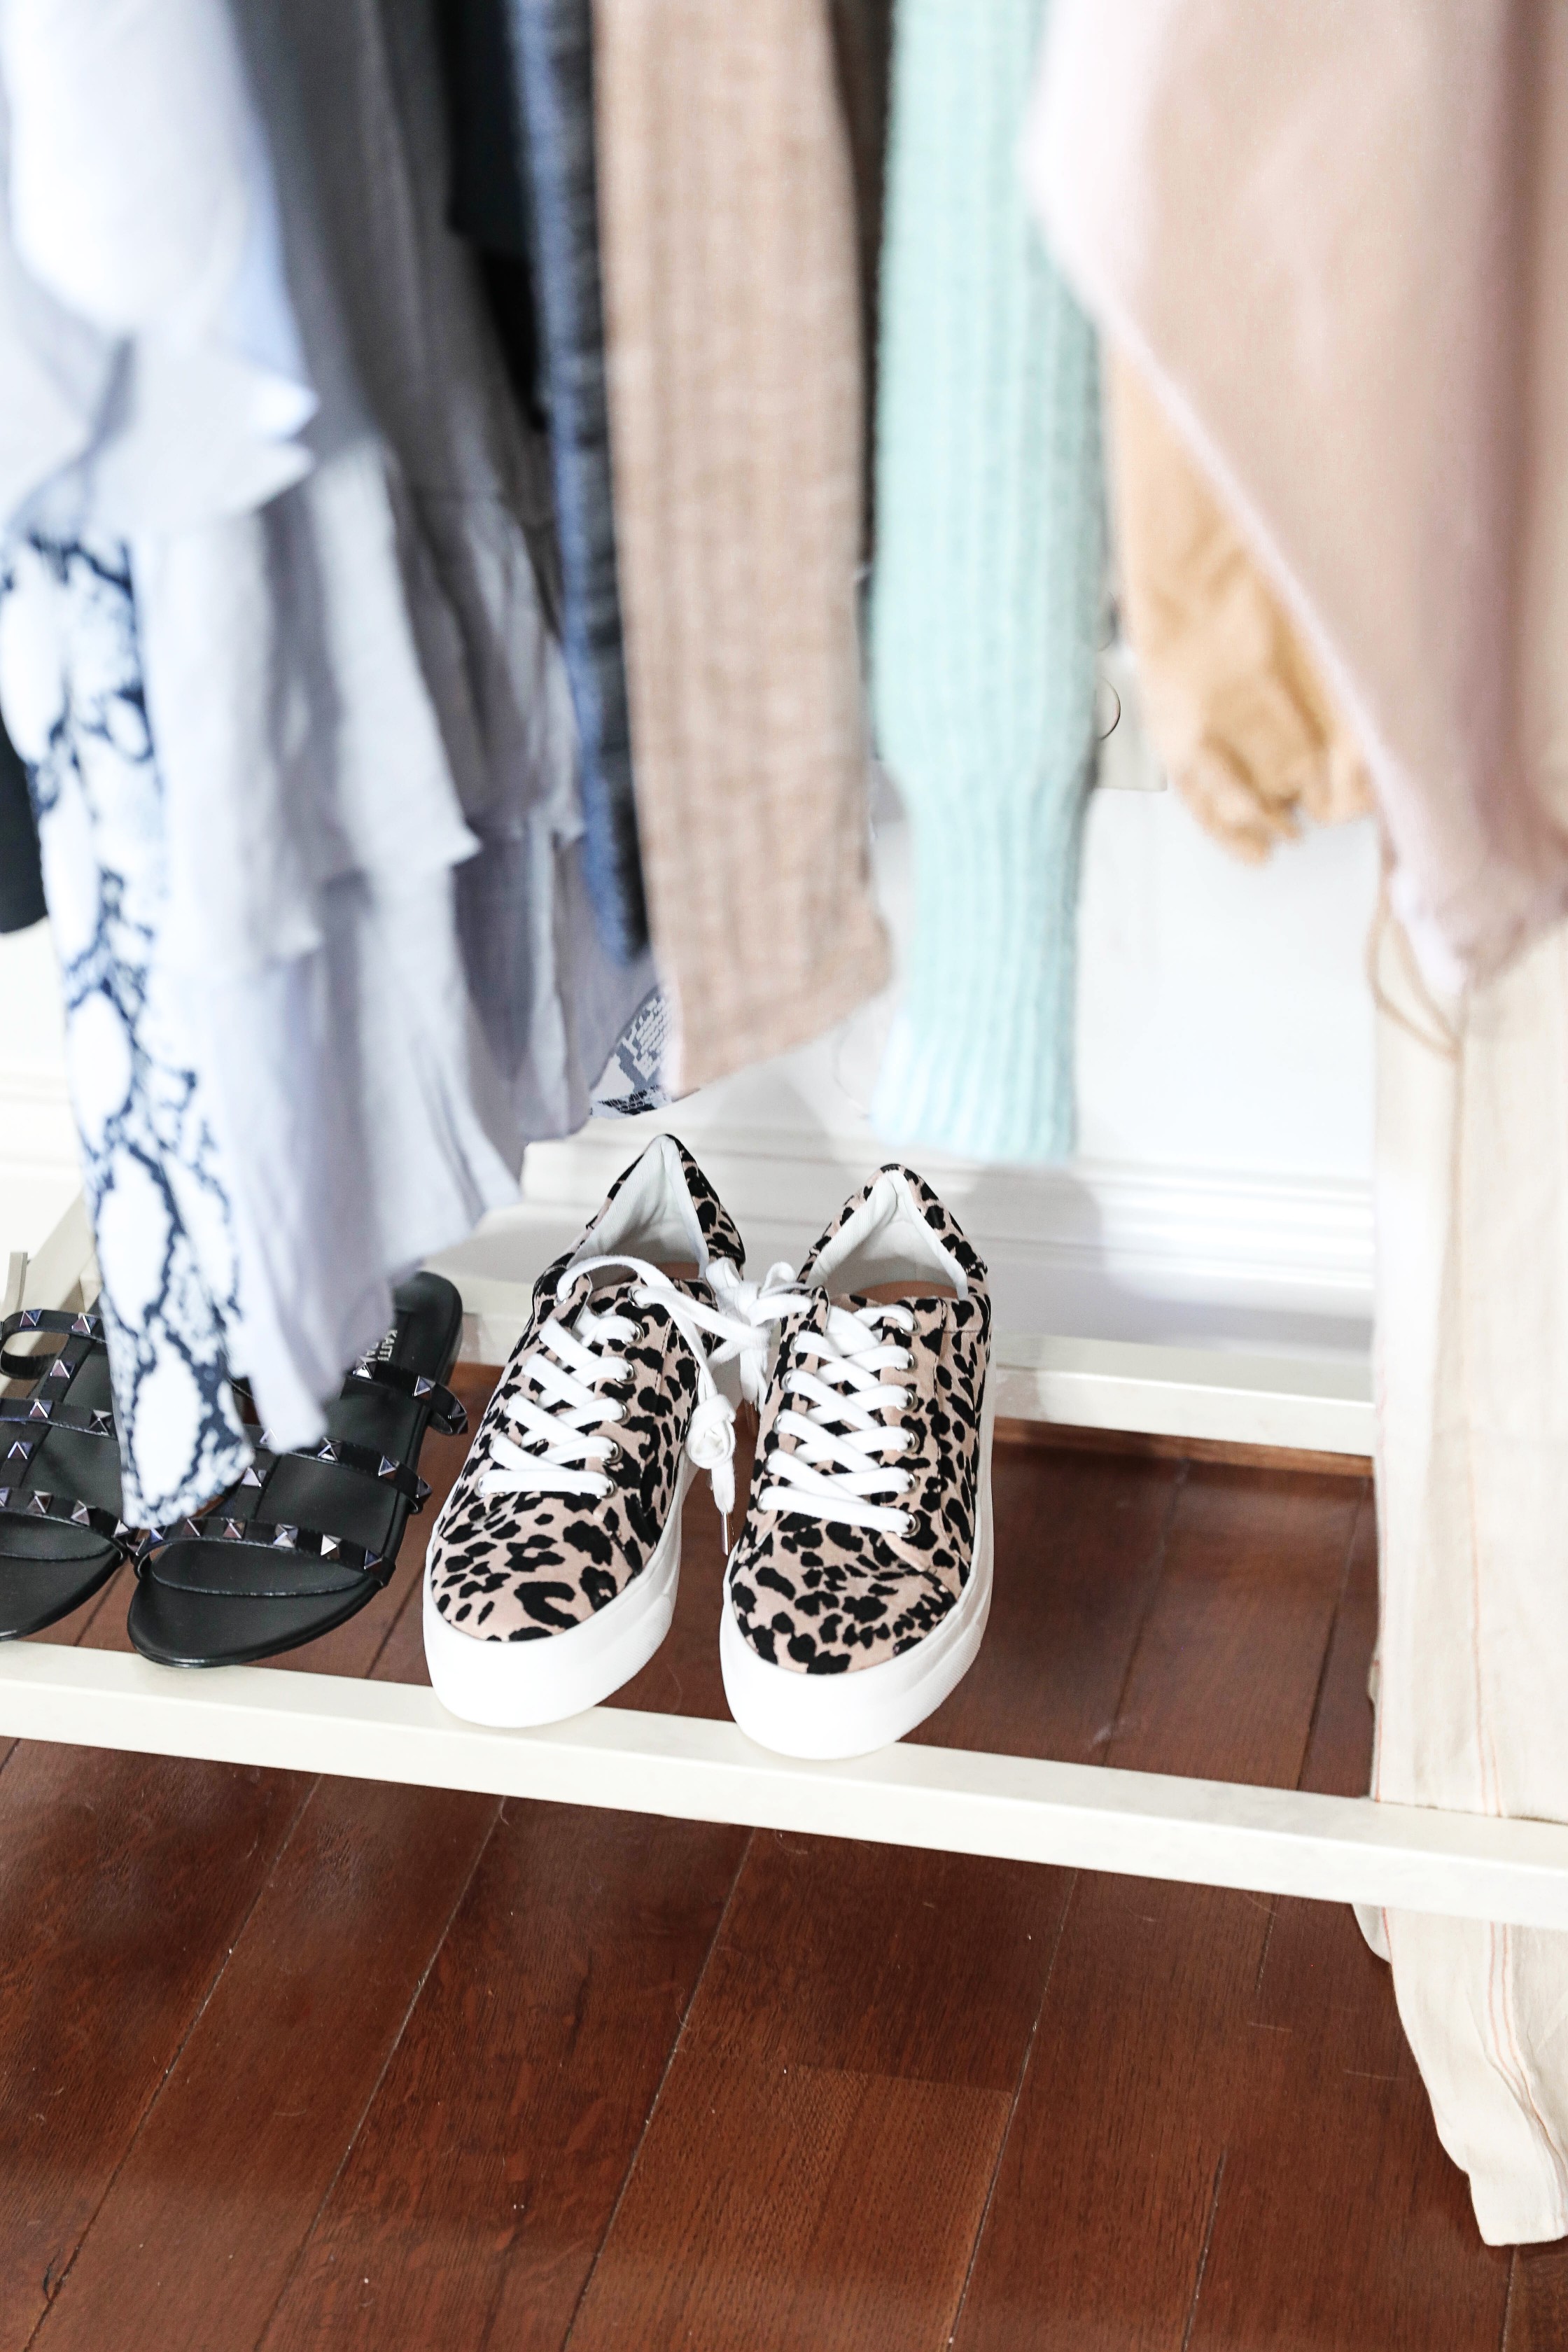 How I plan my outfits for trips and blog photos! Total closet and wardrobe goals! I love my new garment rack right next to my shoe rack and fashion shelves! All the travel packing planning tips you need! Details on fashion blog daily dose of charm by lauren lindmark